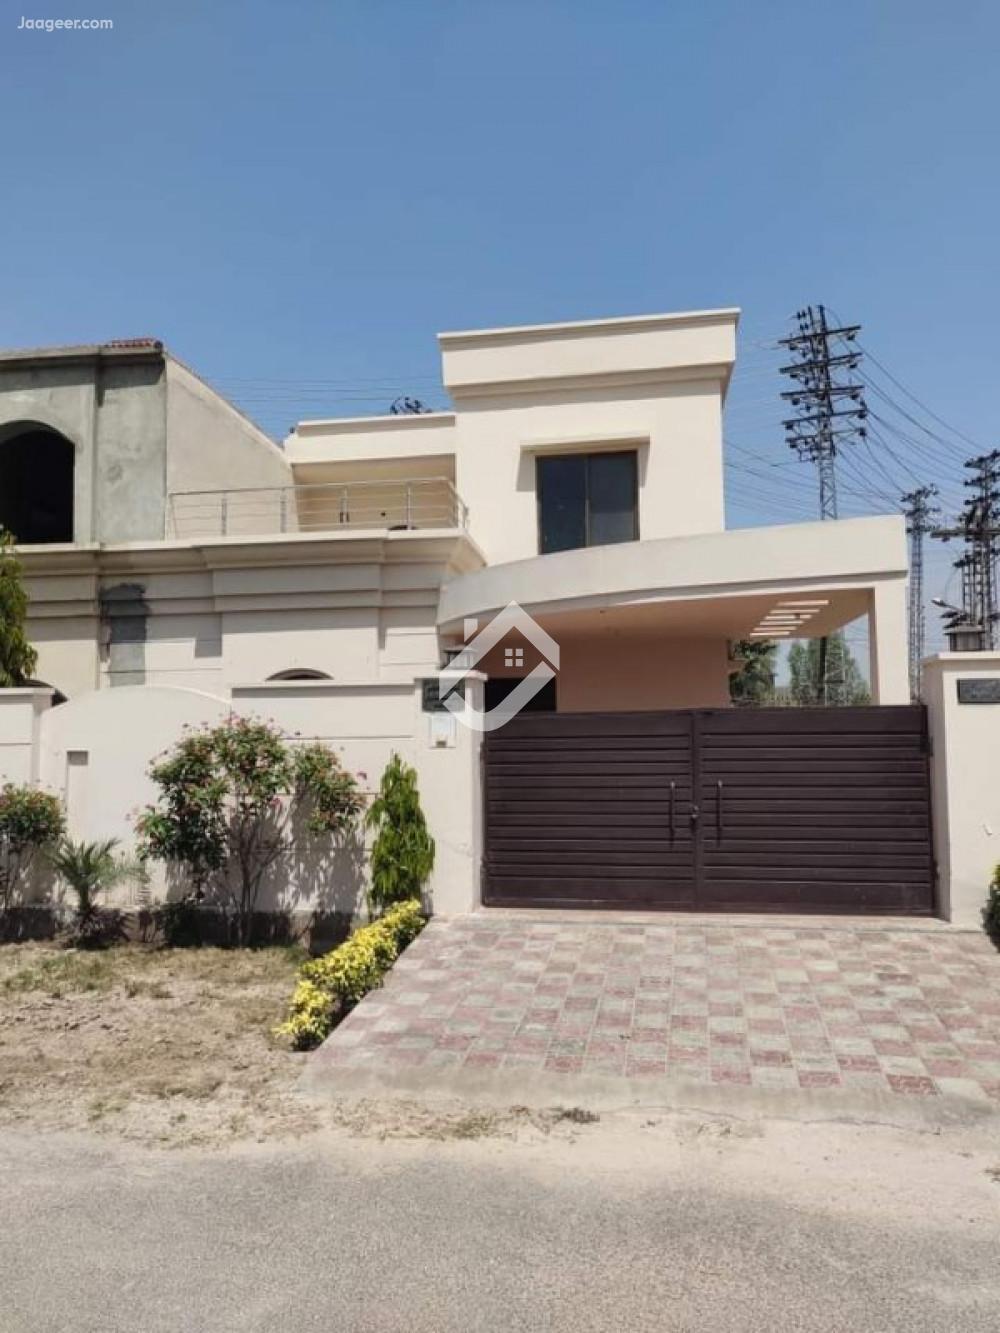 View  8.5 Marla House For Rent In Buch Executive Villas Phase-1 in Buch Executive Villas, Multan